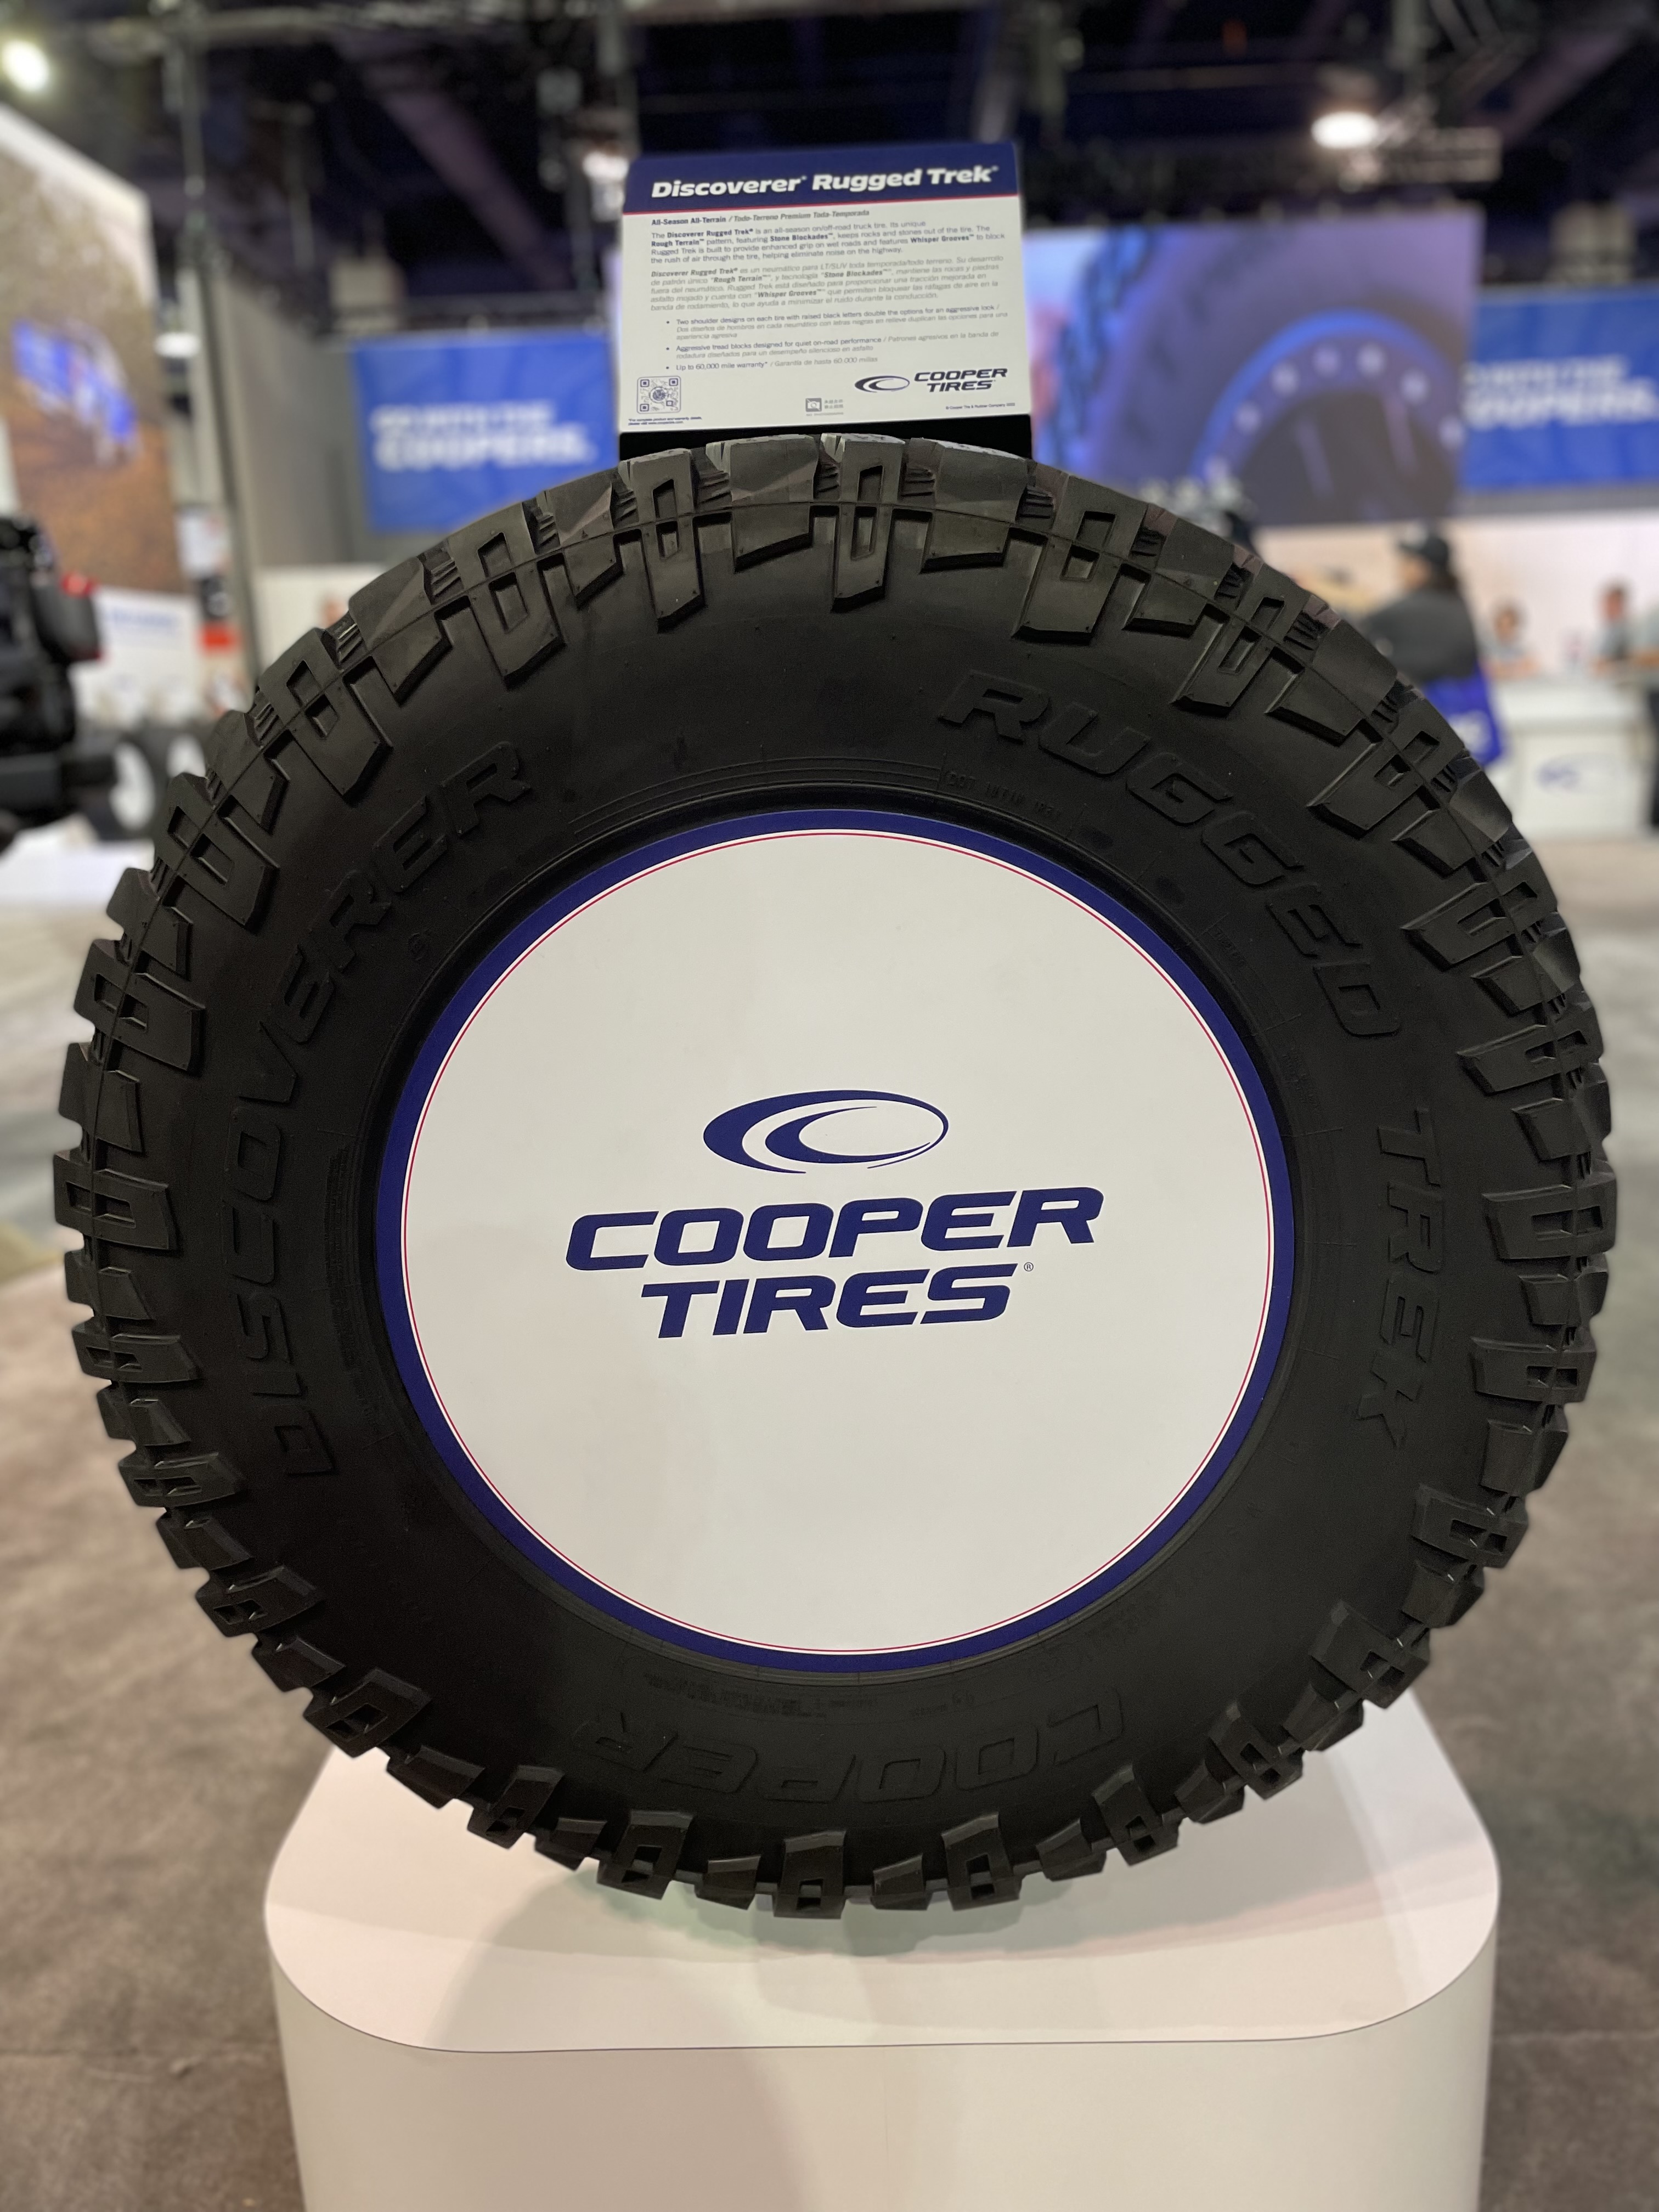 GOODYEAR UNVEILS THE LARGEST TIRE IN ITS COOPER DISCOVERER® RUGGED TREK™  LINE WITH TWO NEW 37-INCH OPTIONS